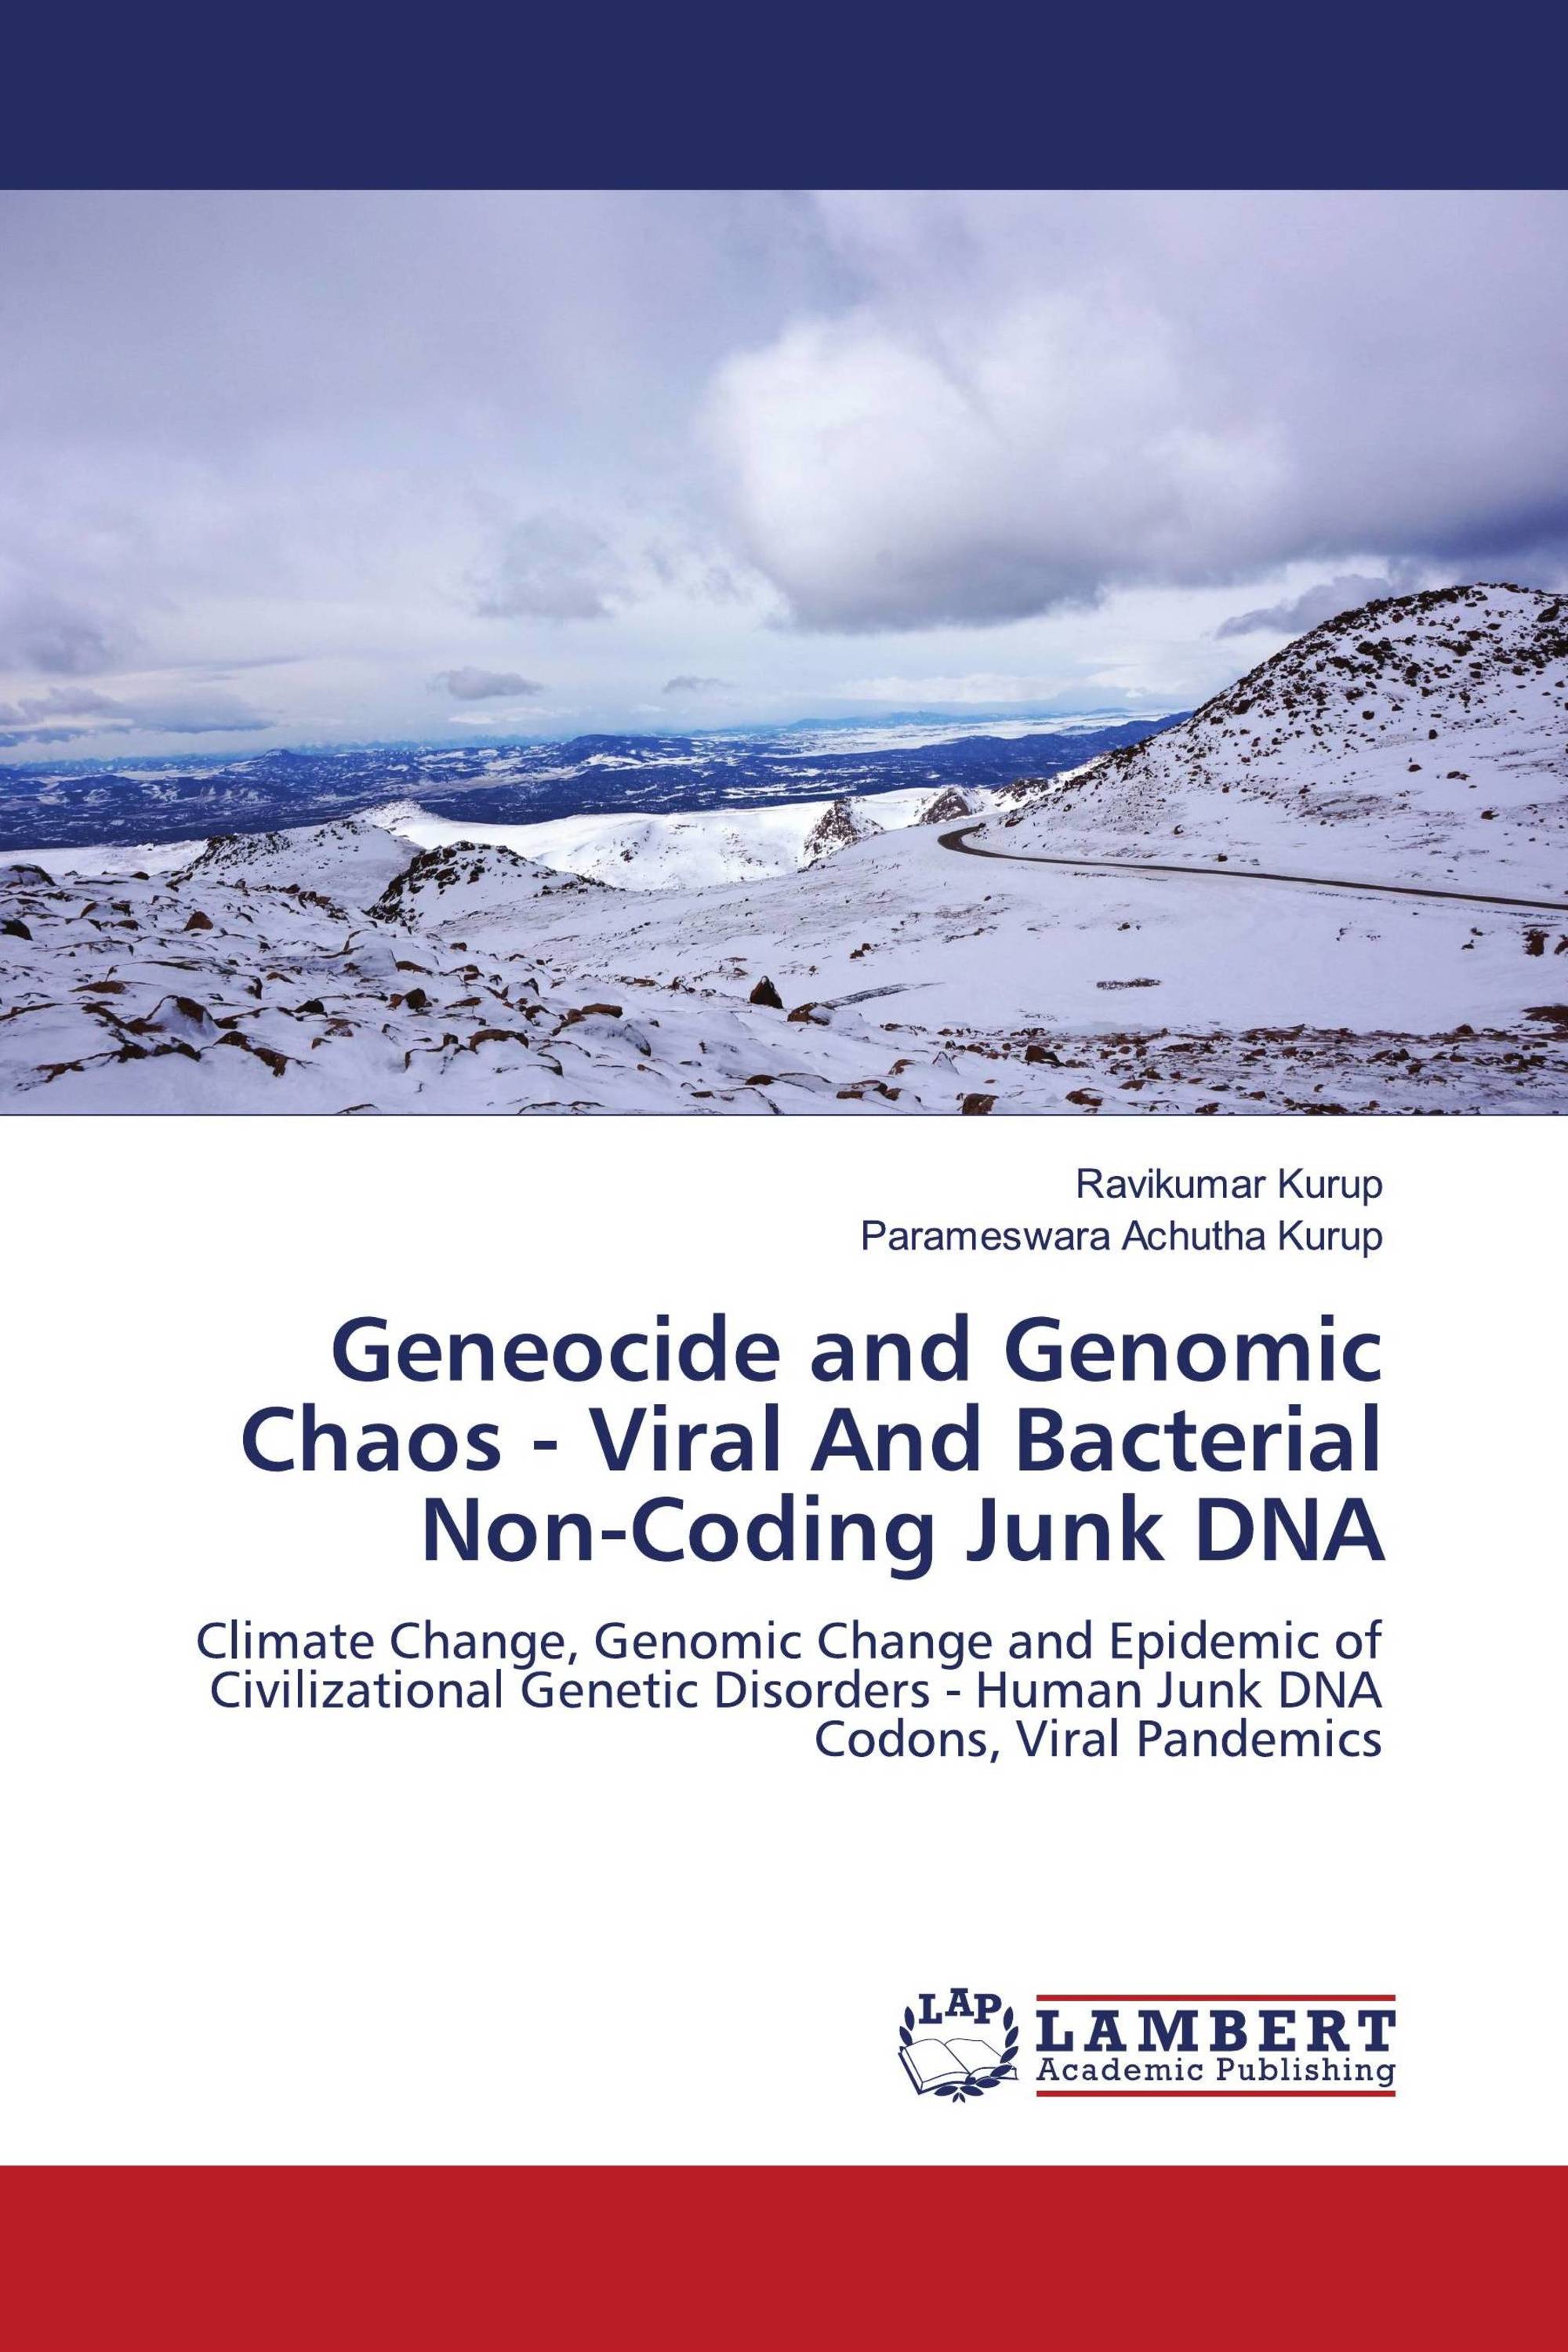 Geneocide and Genomic Chaos - Viral And Bacterial Non-Coding Junk DNA